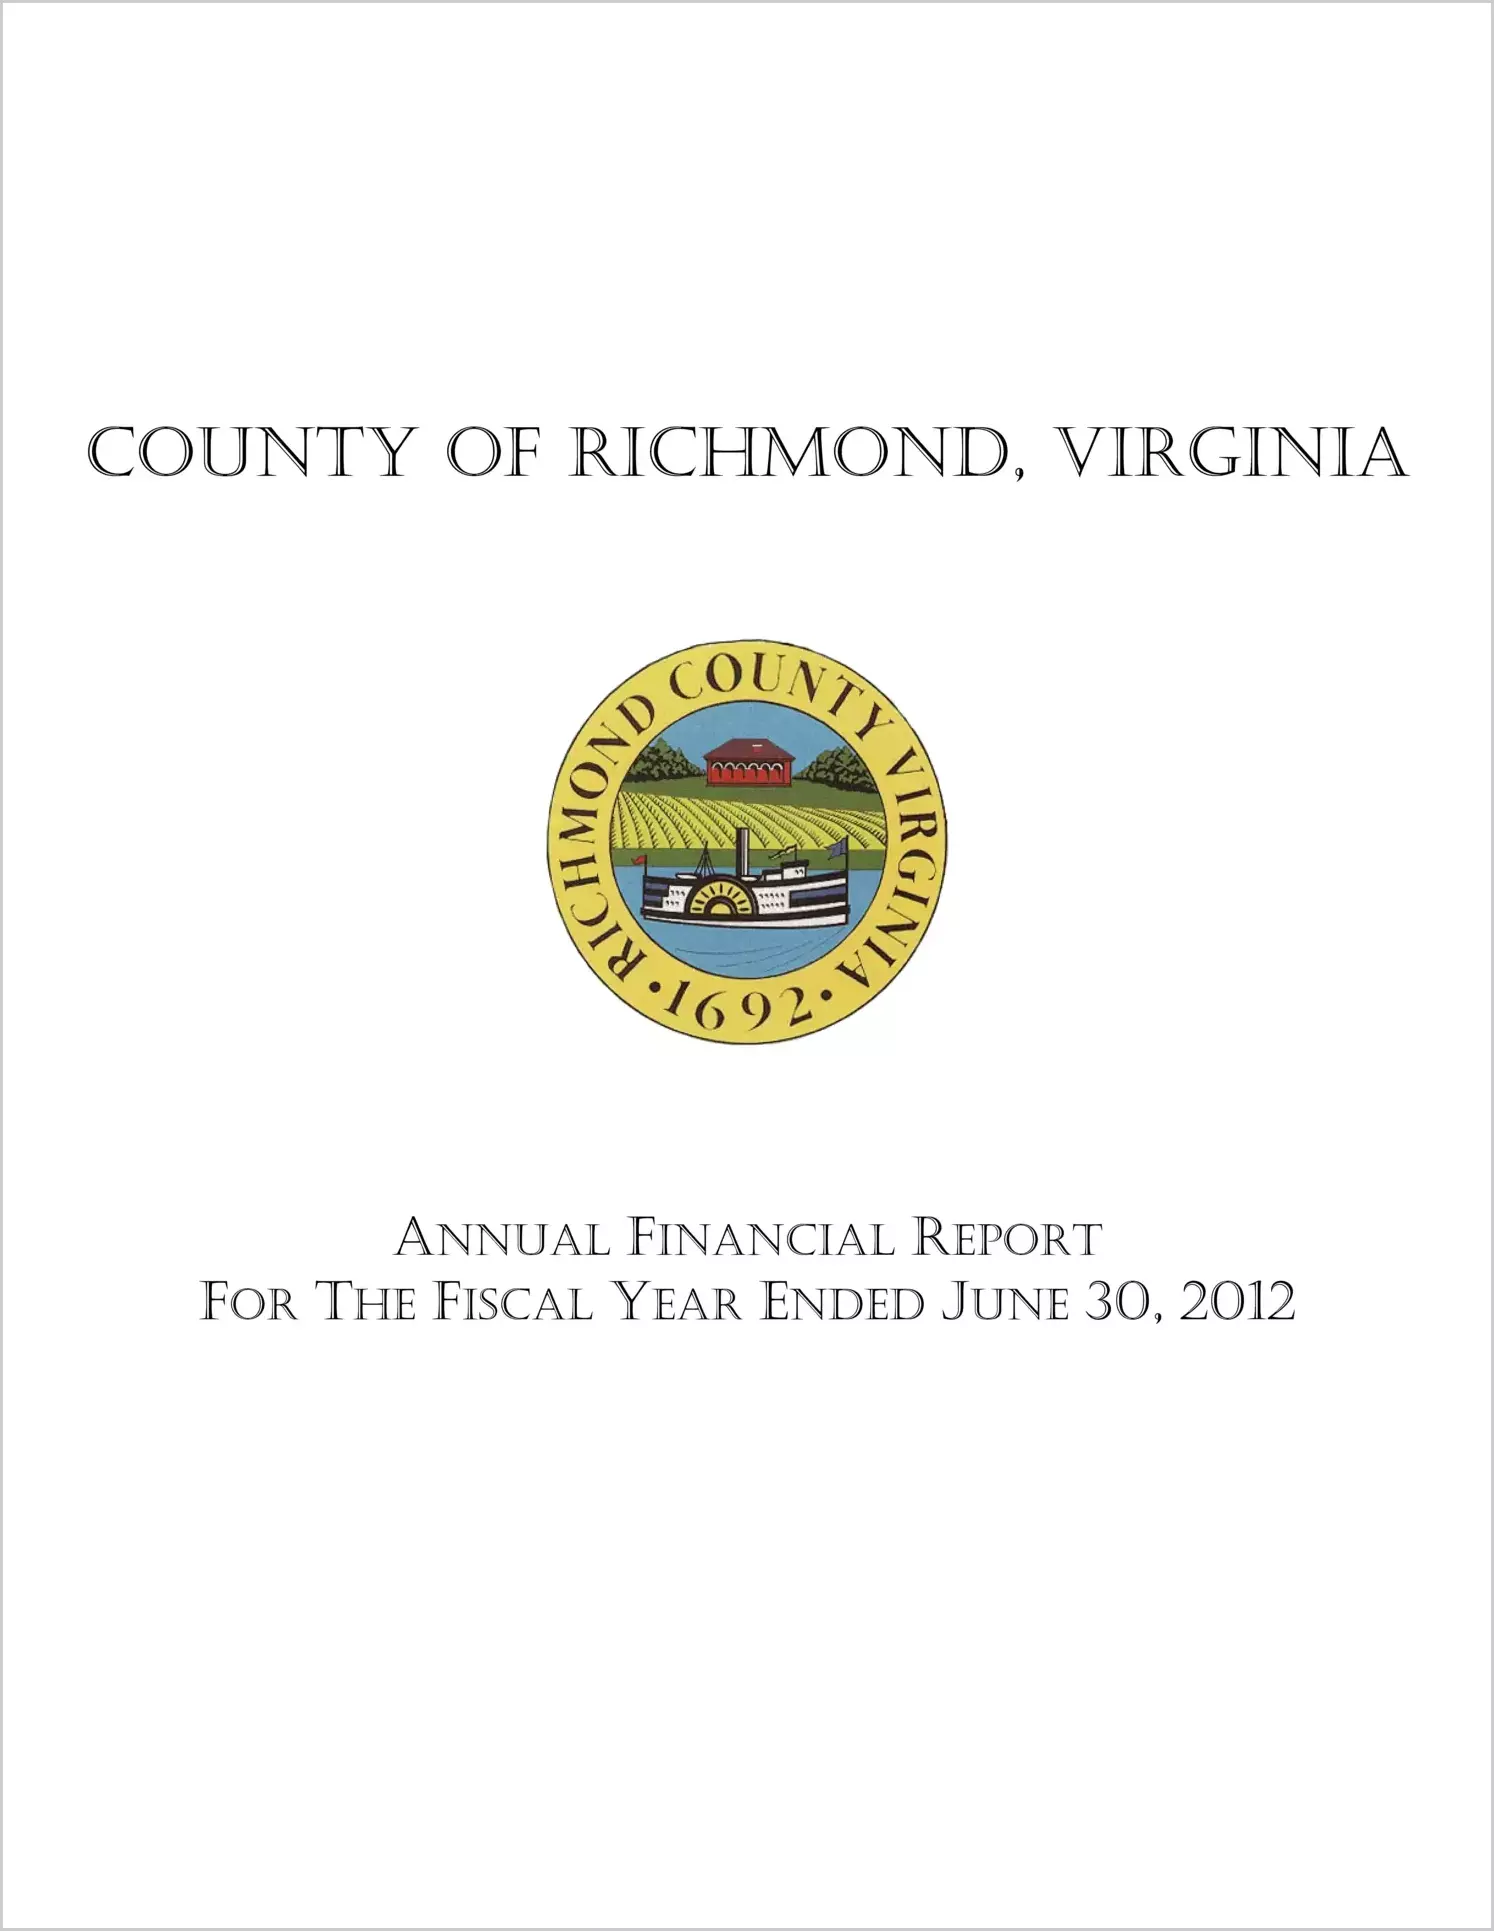 2012 Annual Financial Report for County of Richmond